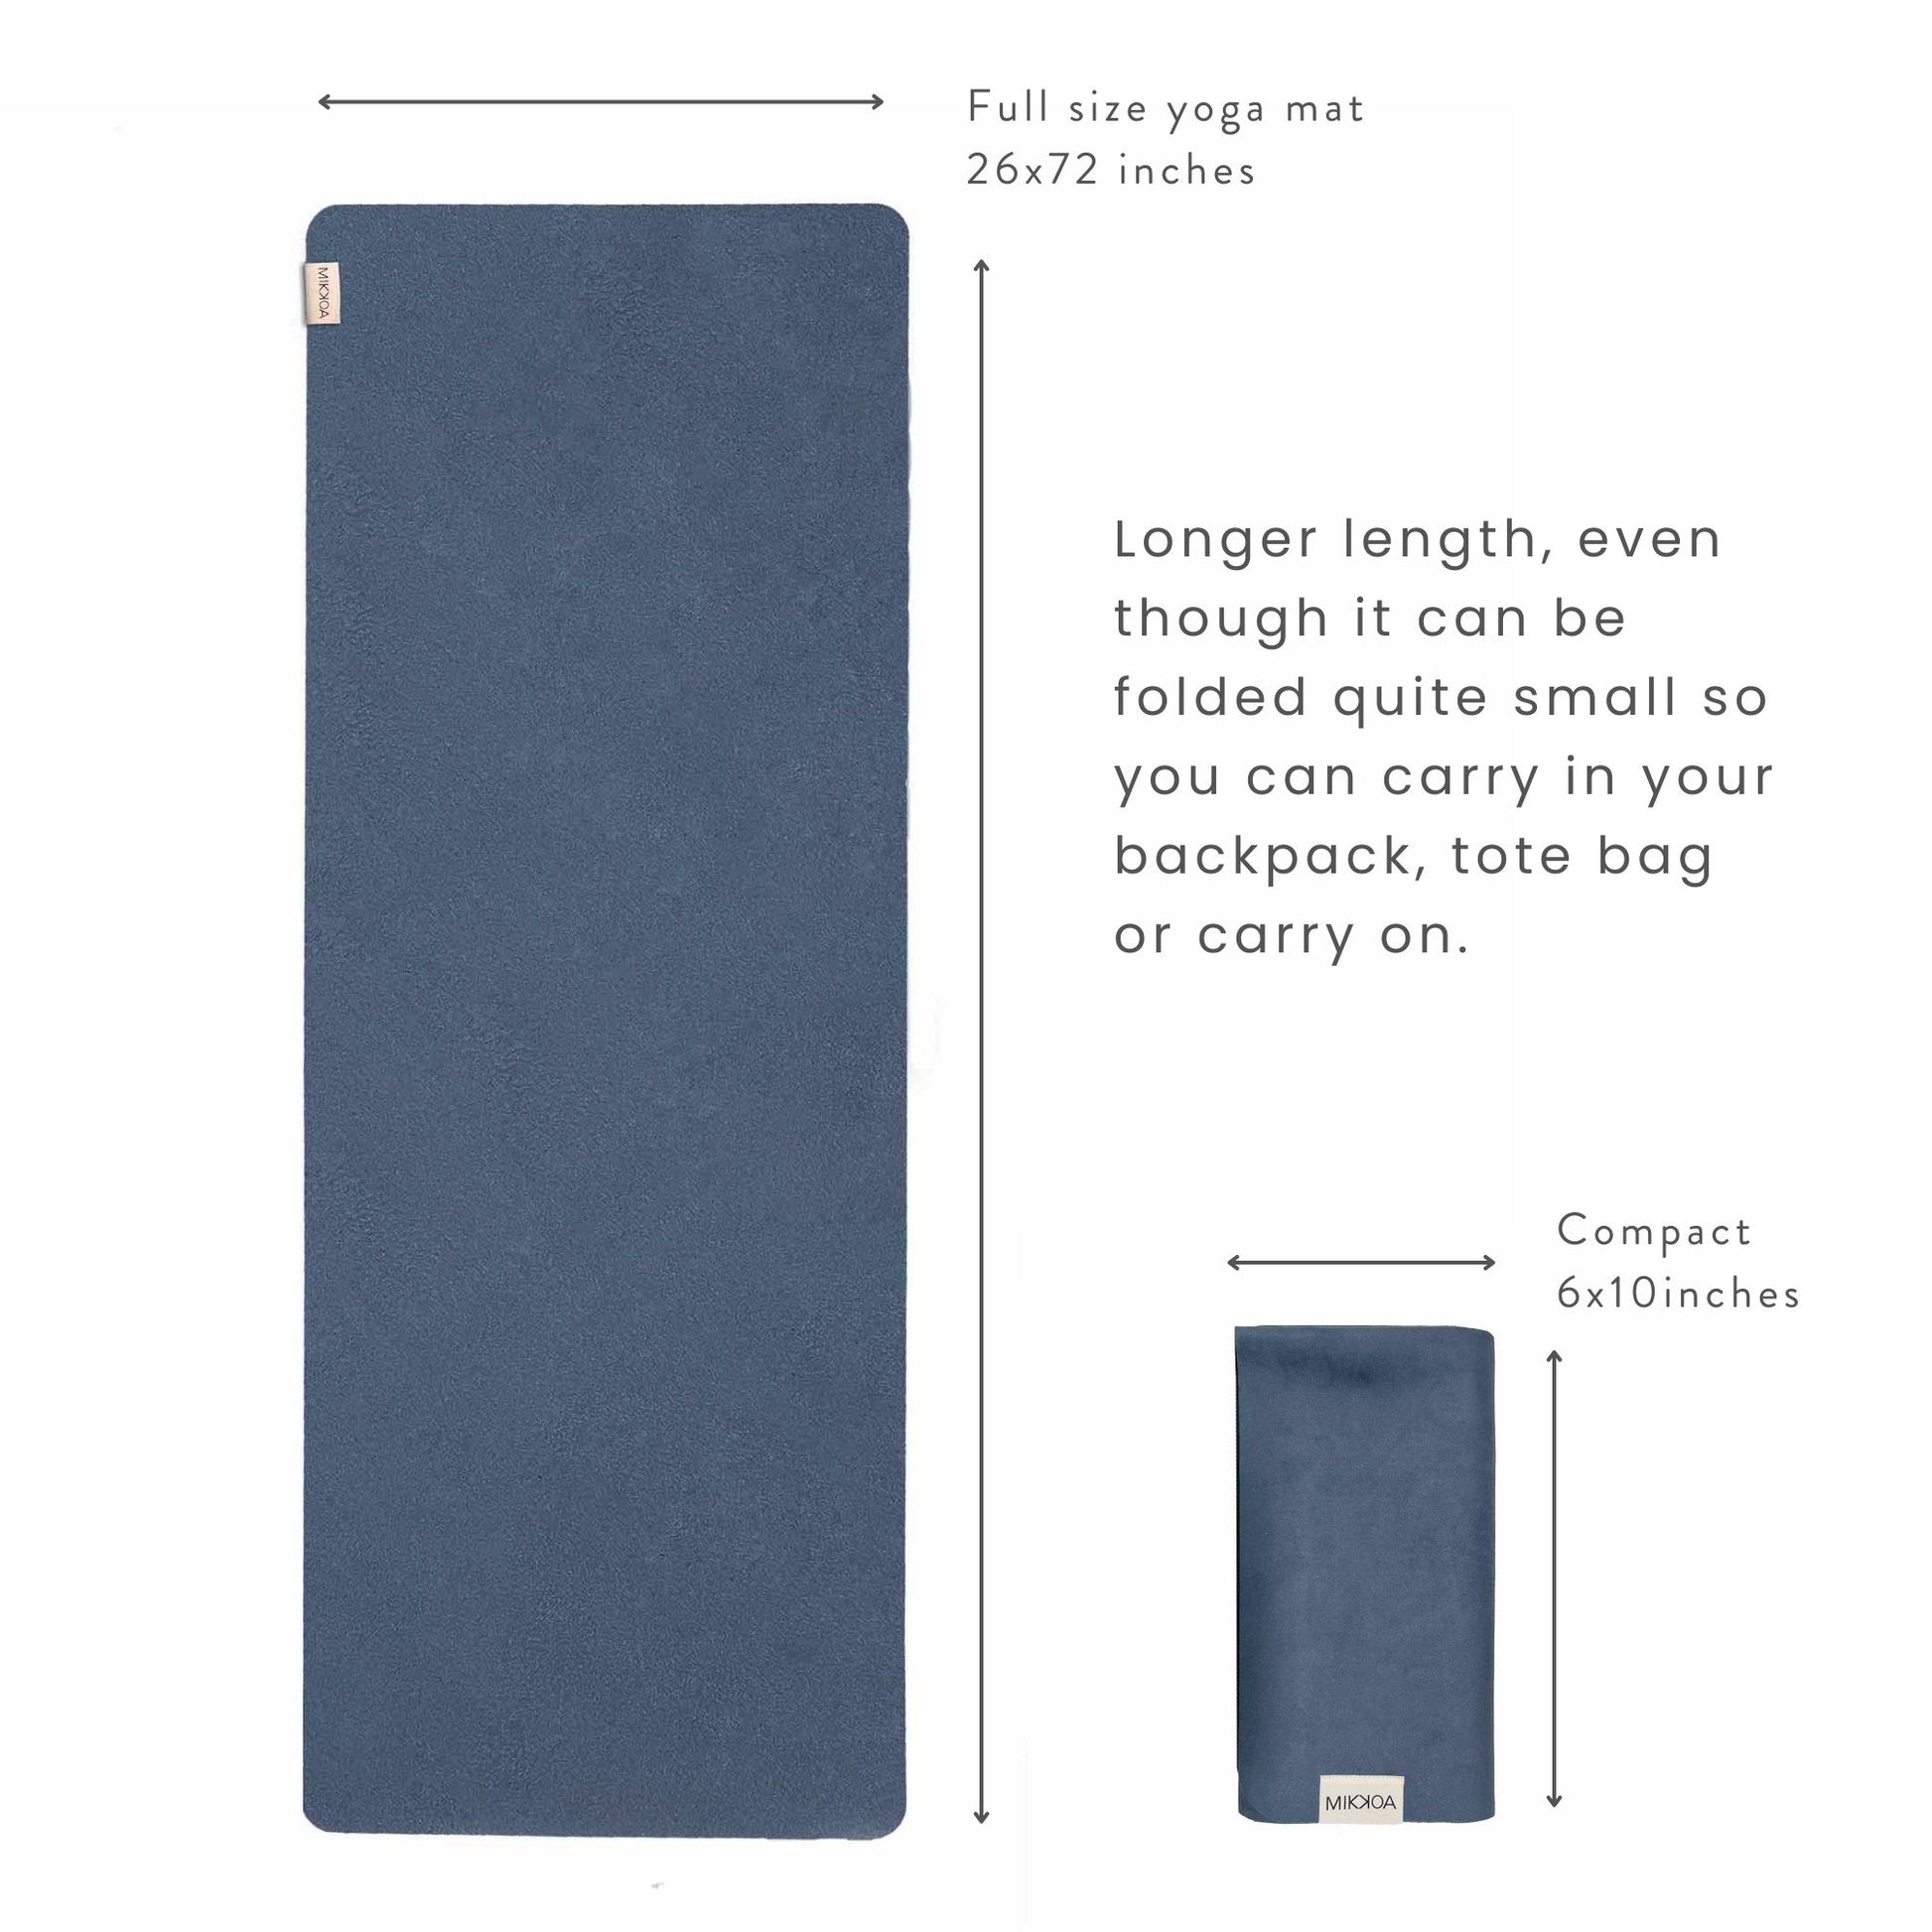 Space Backpacking Travel Yoga Mat